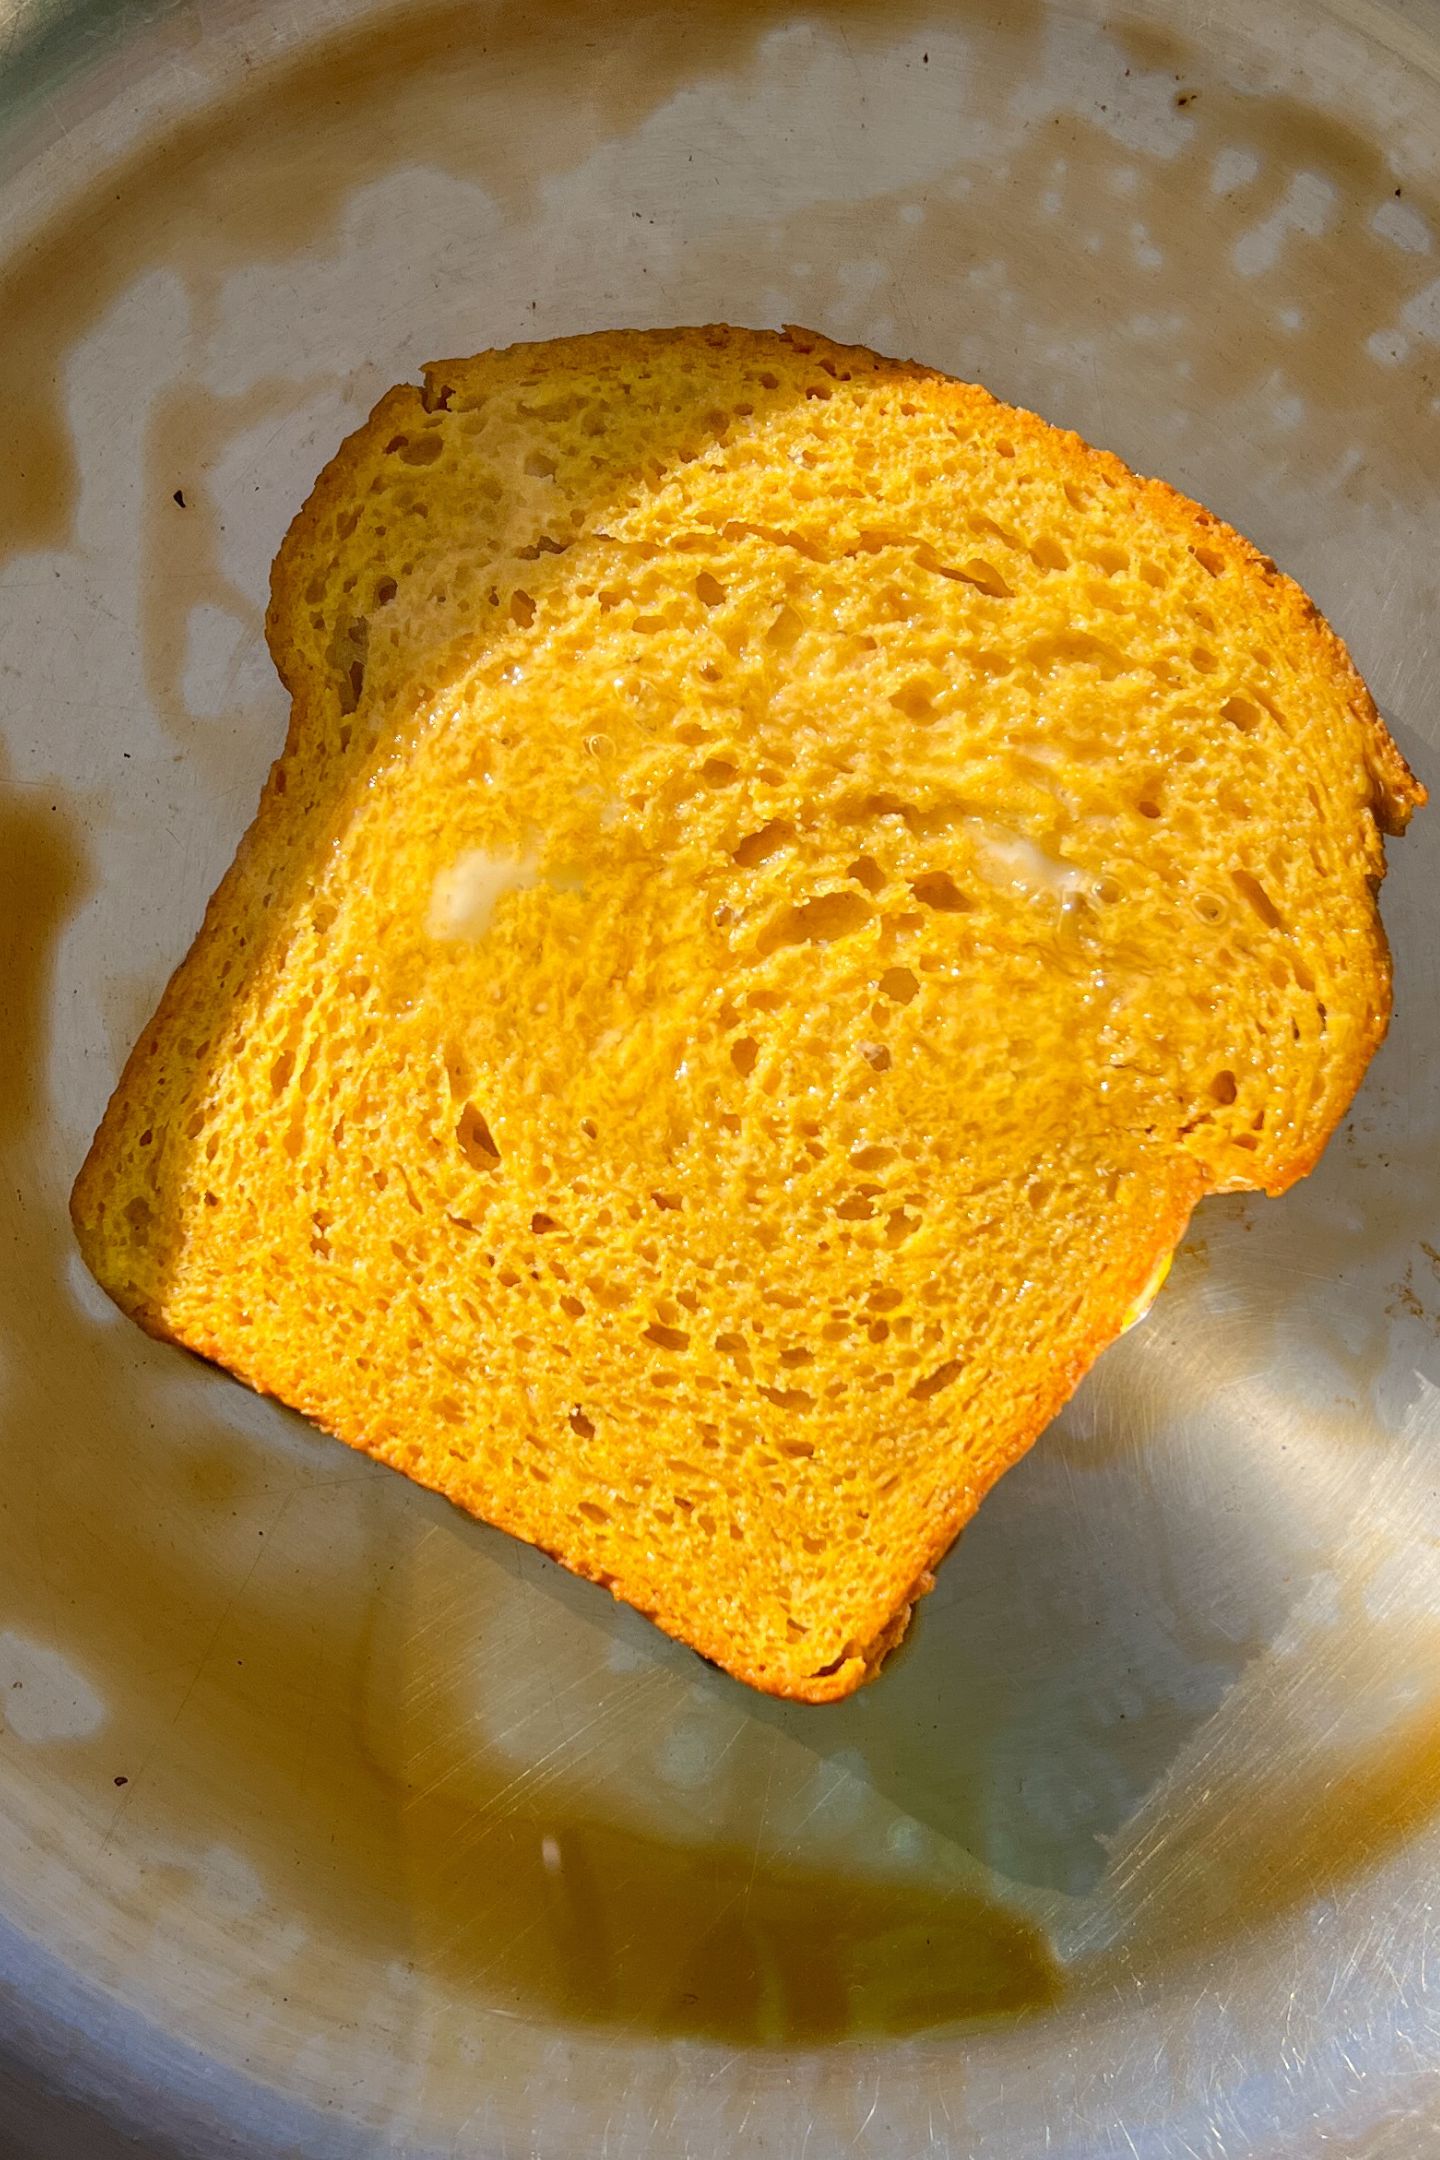 Slice of soaked bread in a heated pan.